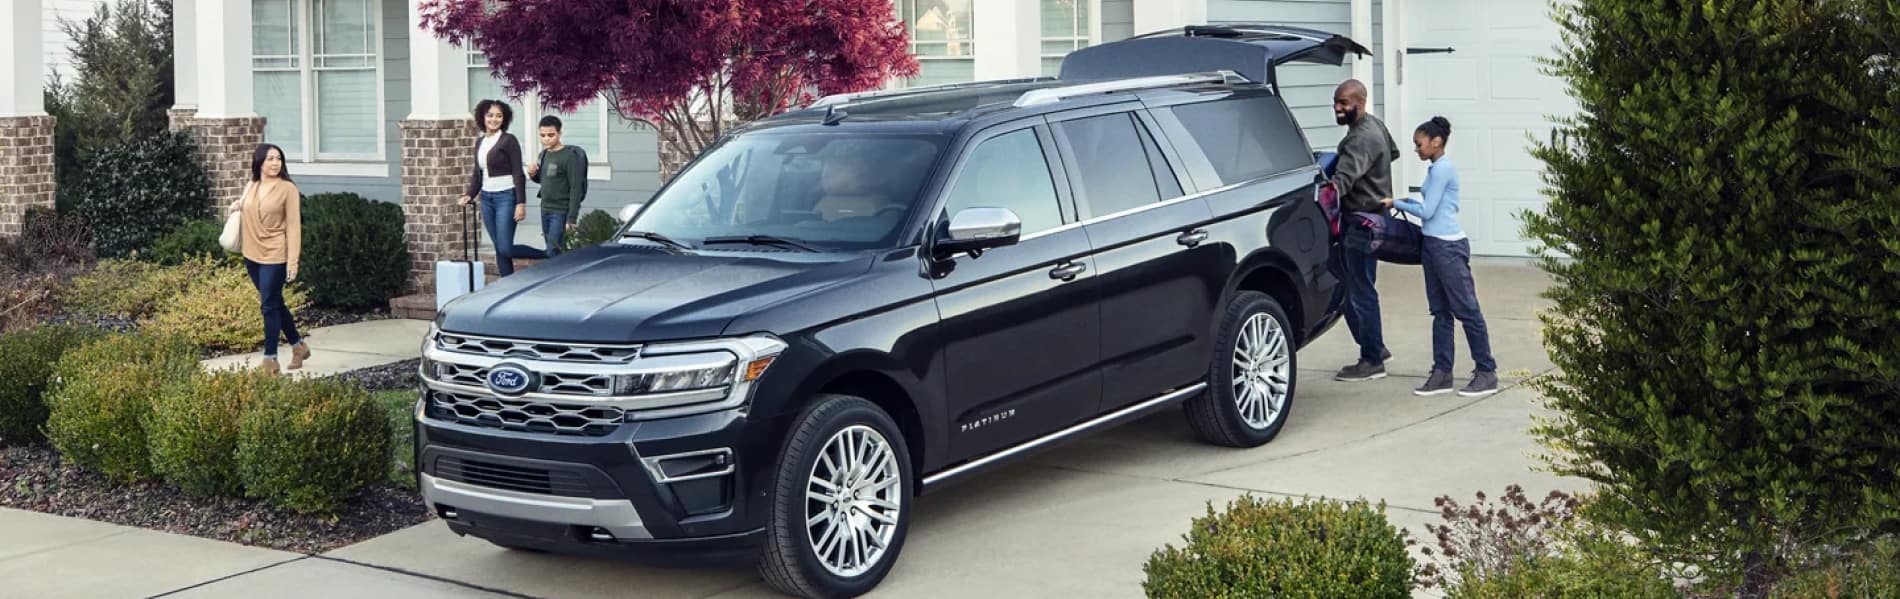 Black Ford SUV with family